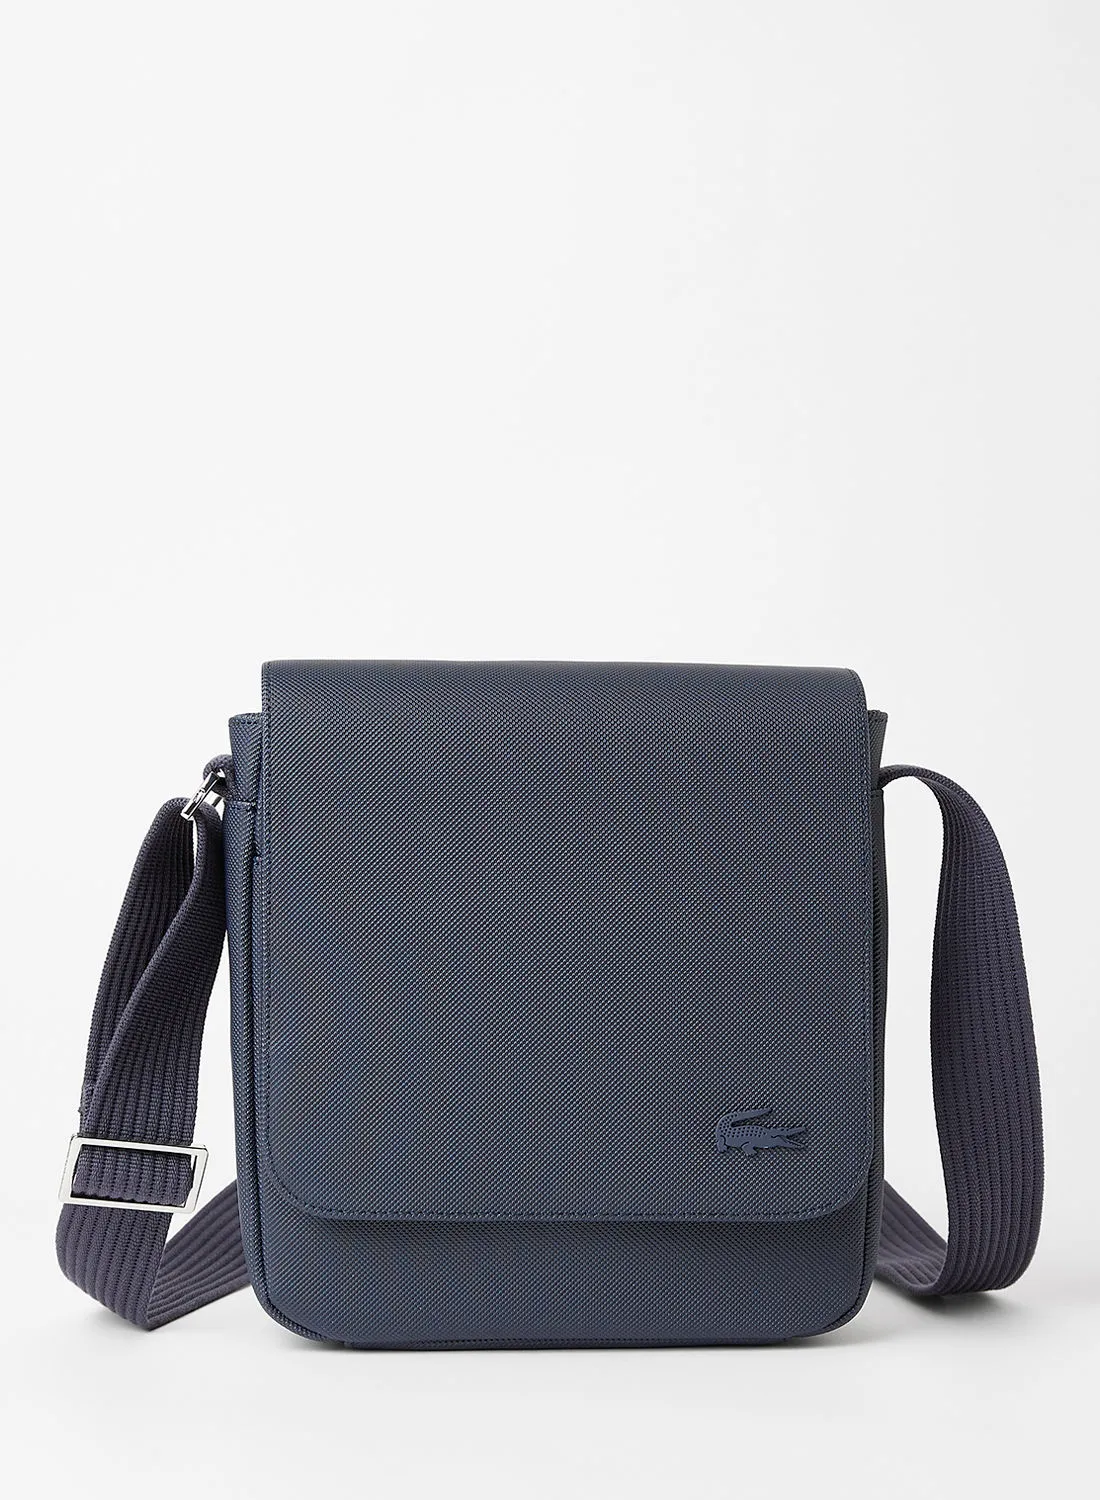 LACOSTE Flap Crossover Bag Blue